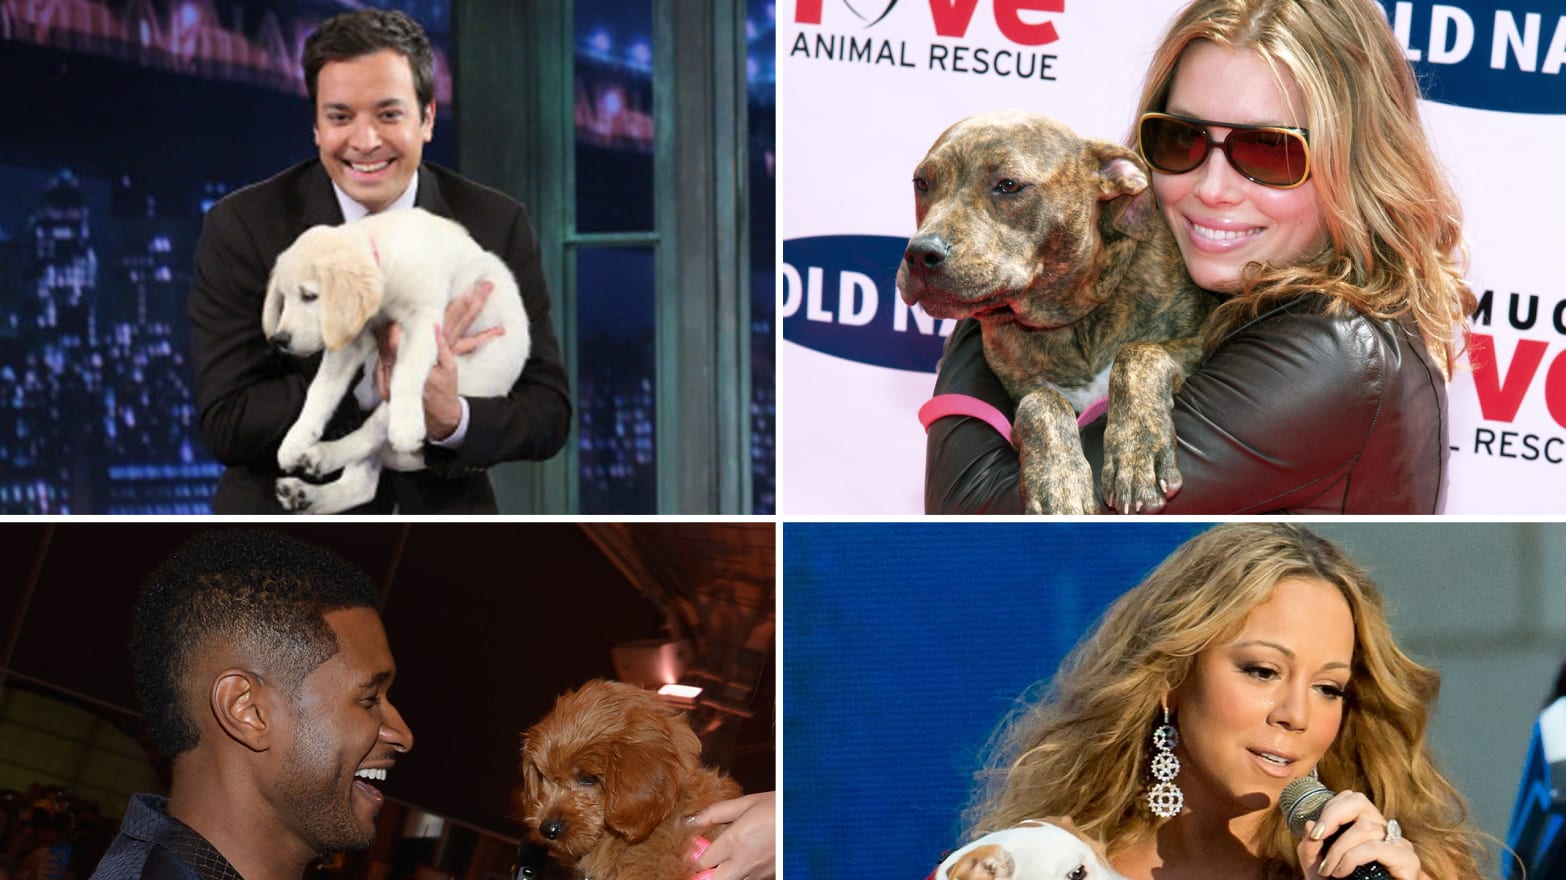 Famous Celebrity Dogs